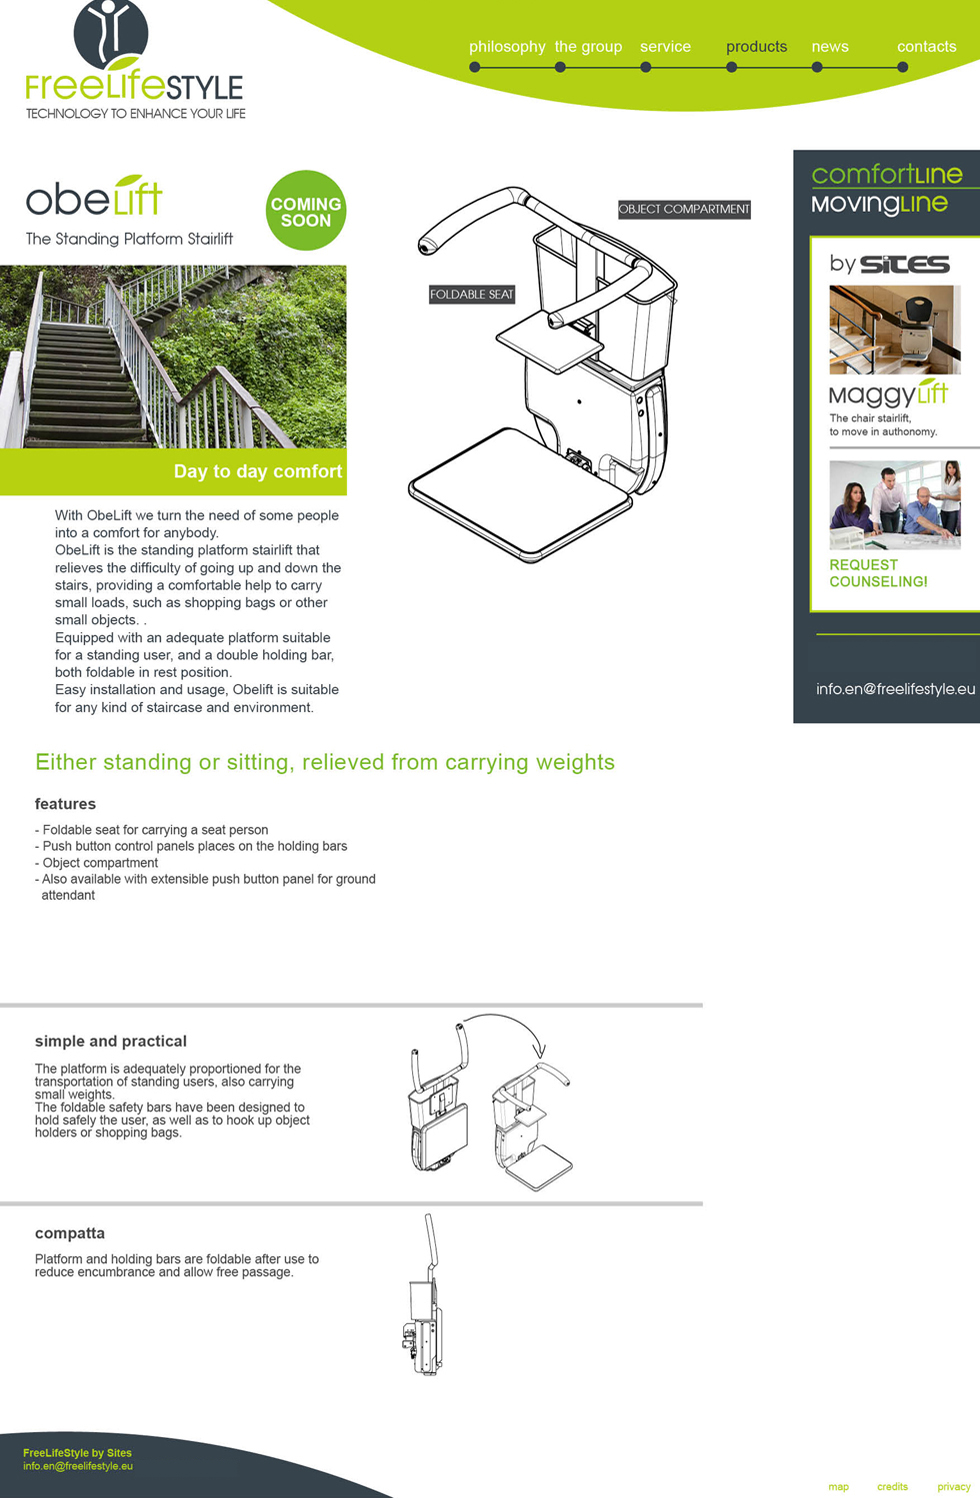 Obe Lift, the standing platform stairlift